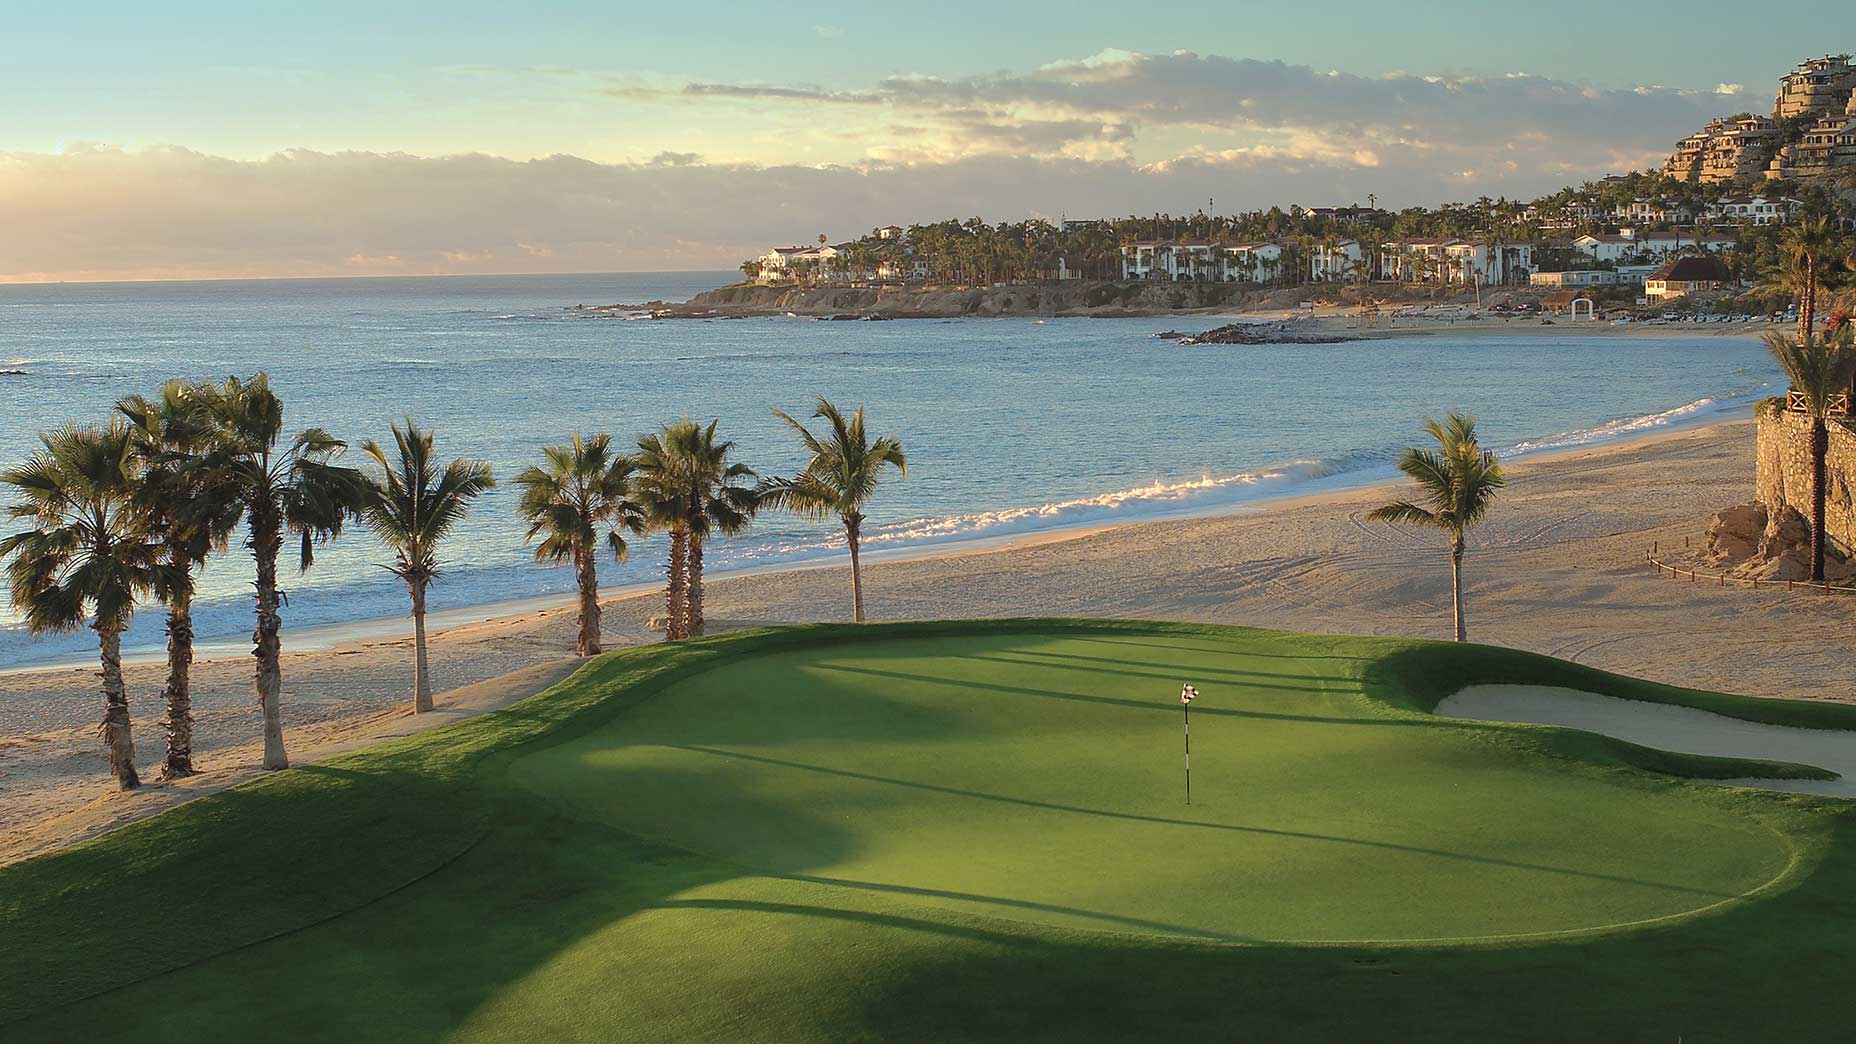 View of a golf hole at One&Only Palmilla